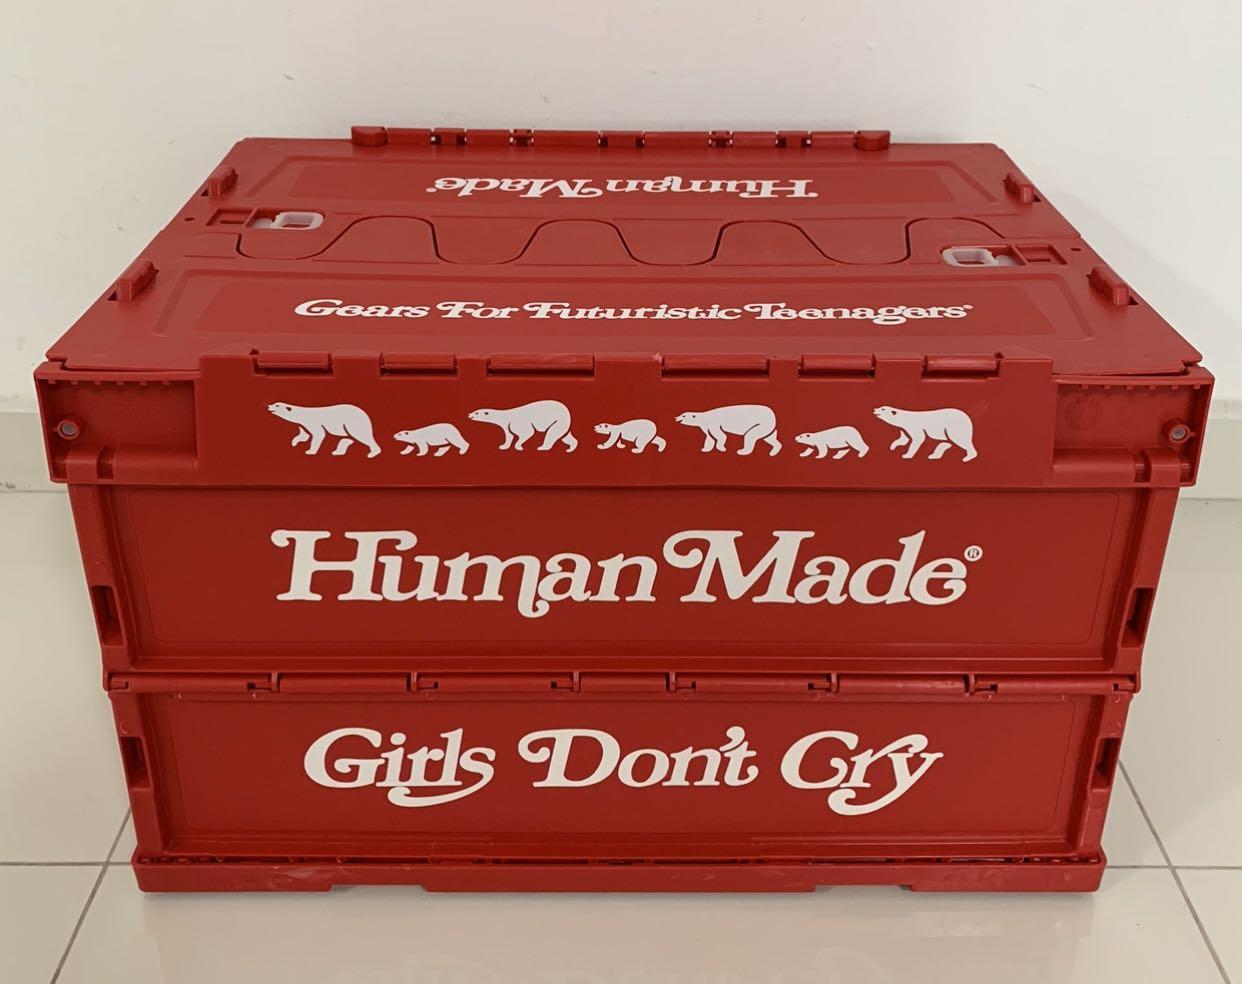 girls don't cry humanmade container | hmgrocerant.com